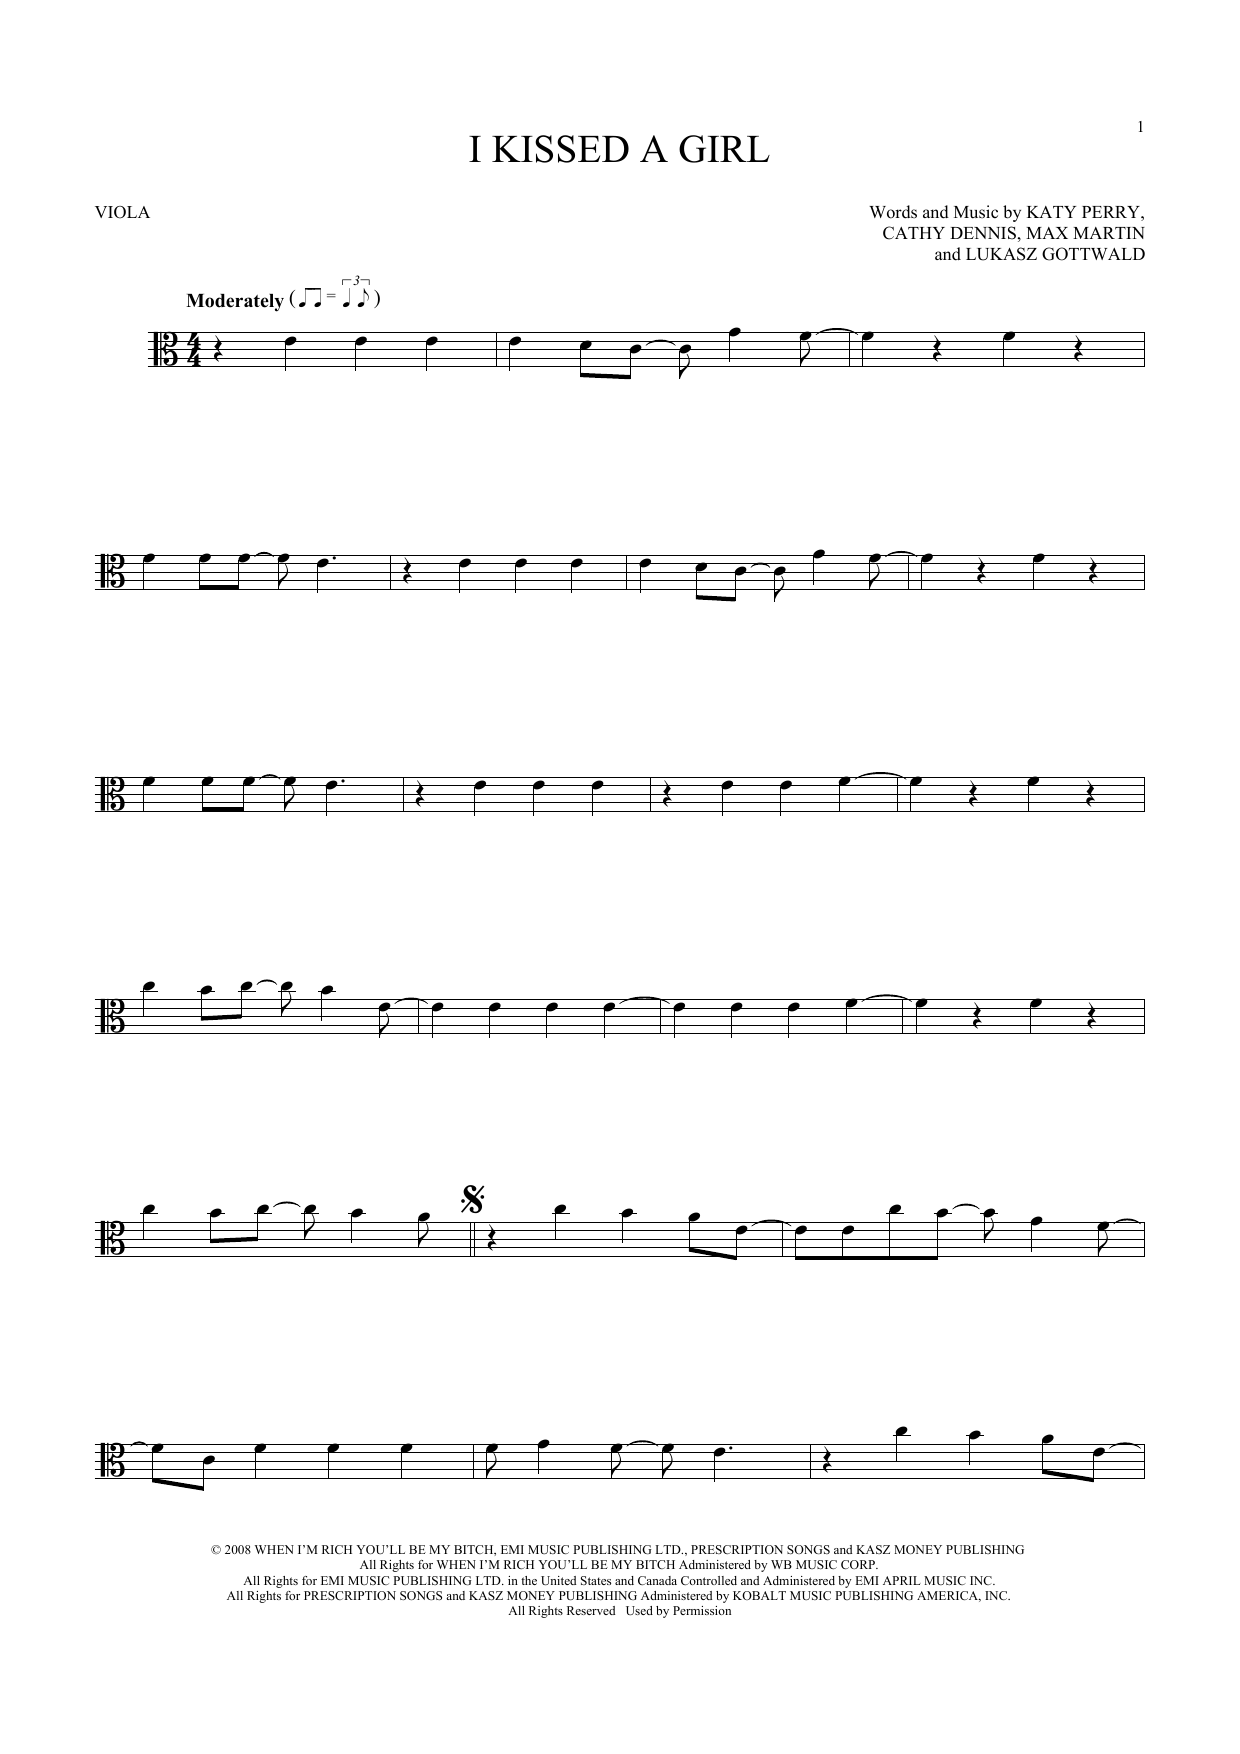 Download Katy Perry I Kissed A Girl Sheet Music